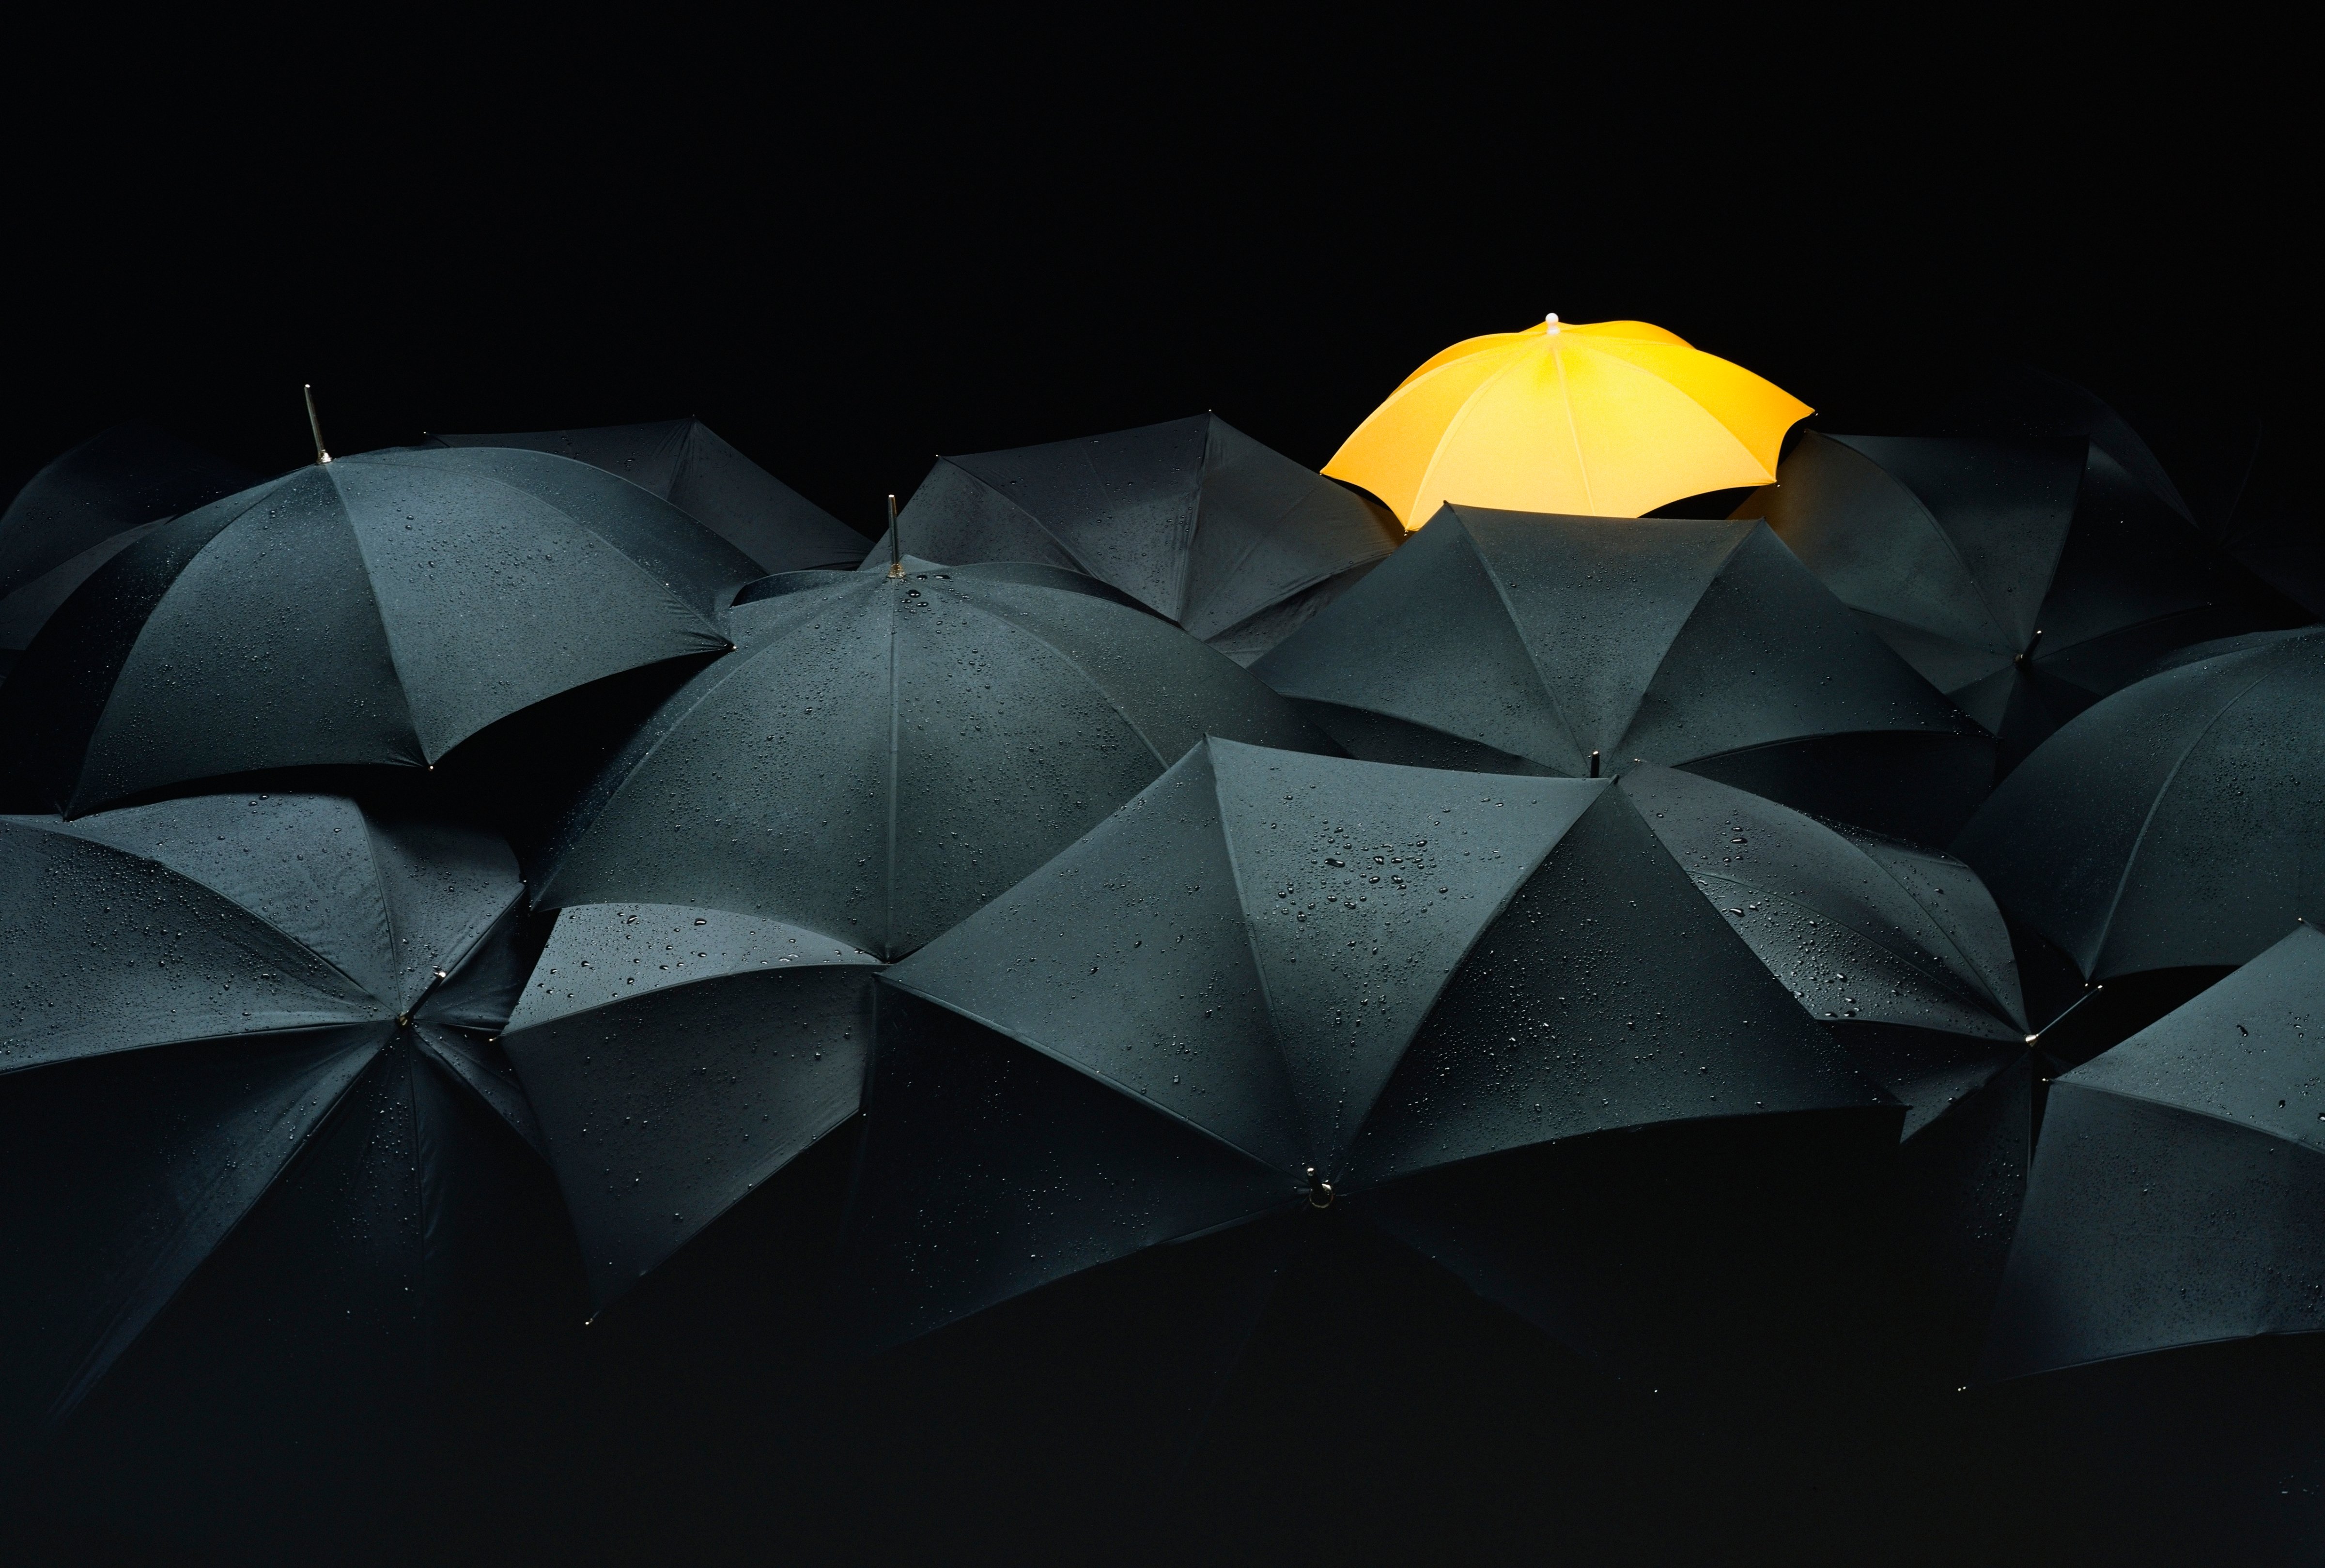 One yellow umbrella among many black umbrellas. (Southern Stock—Getty Images)